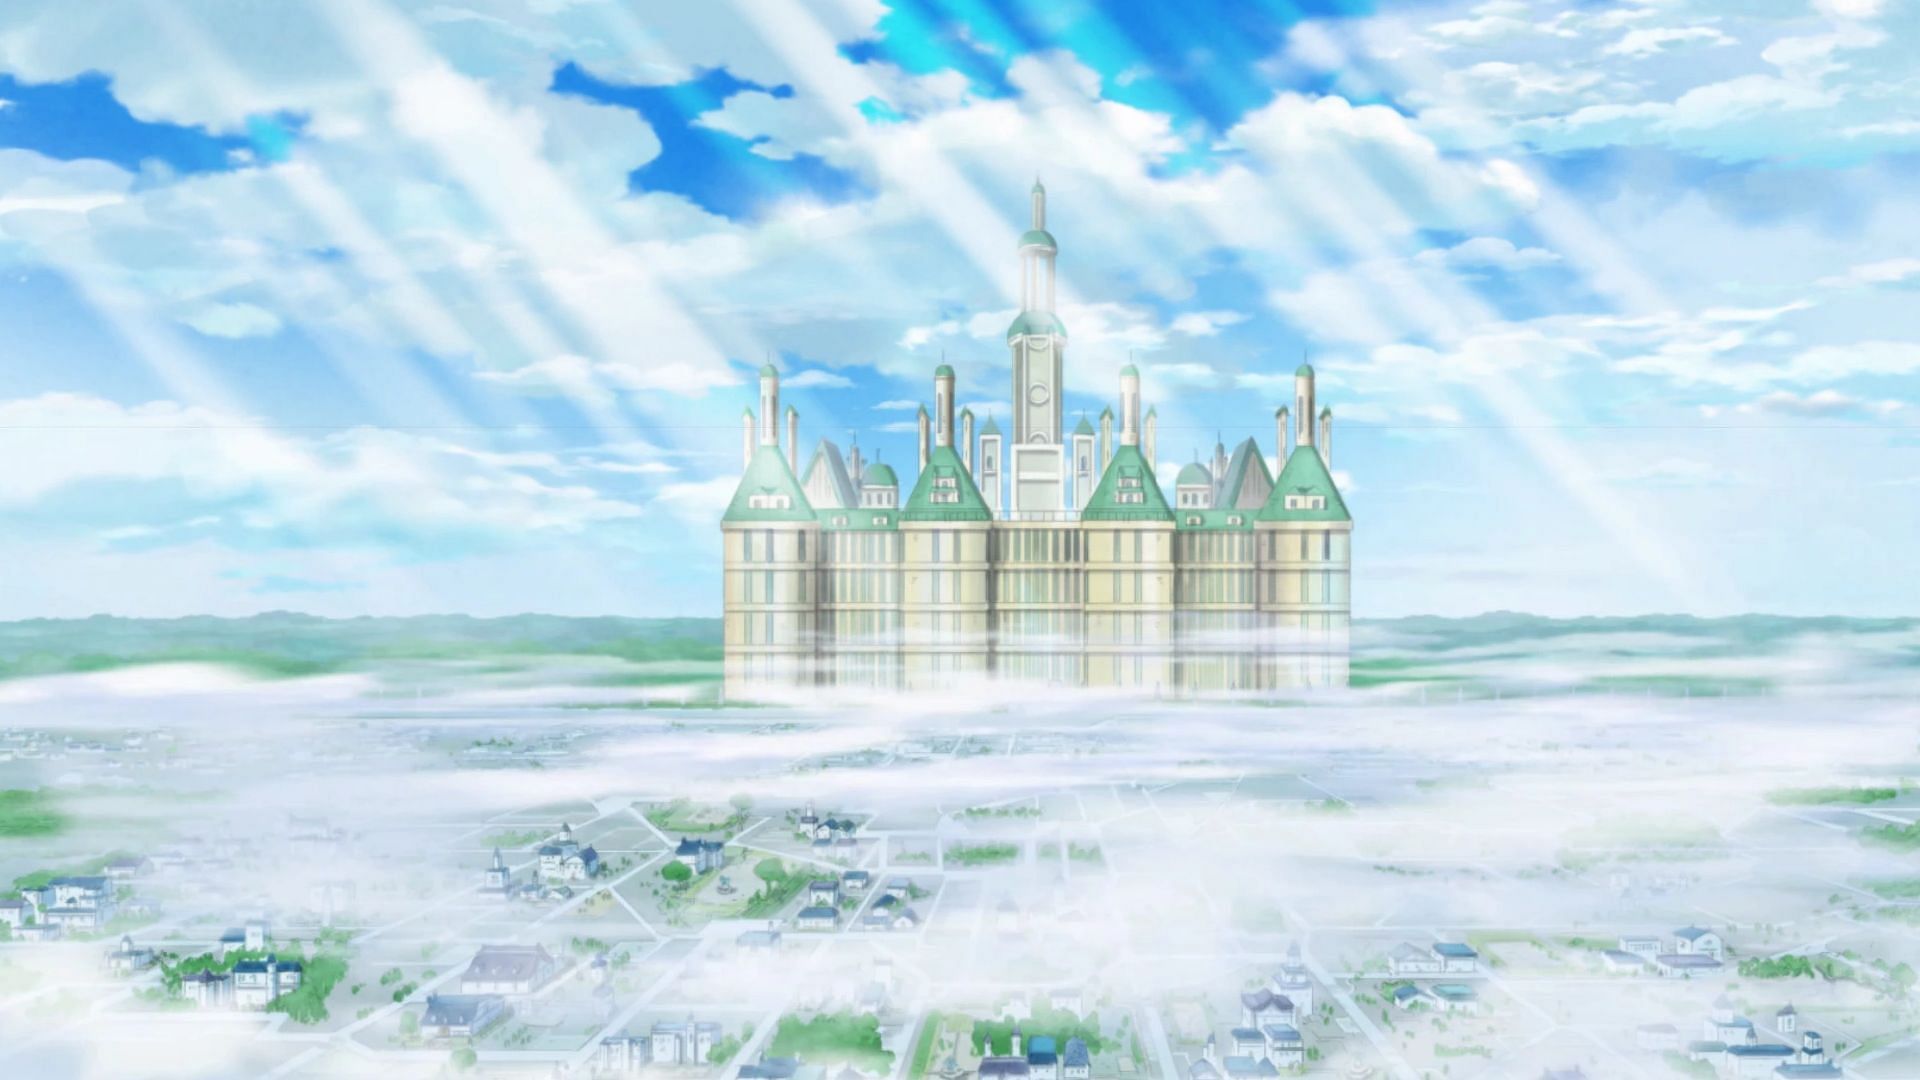 The Holy Knights are connected to the Holy Land of Mary Geoise (Image via Toei Animation, One Piece)